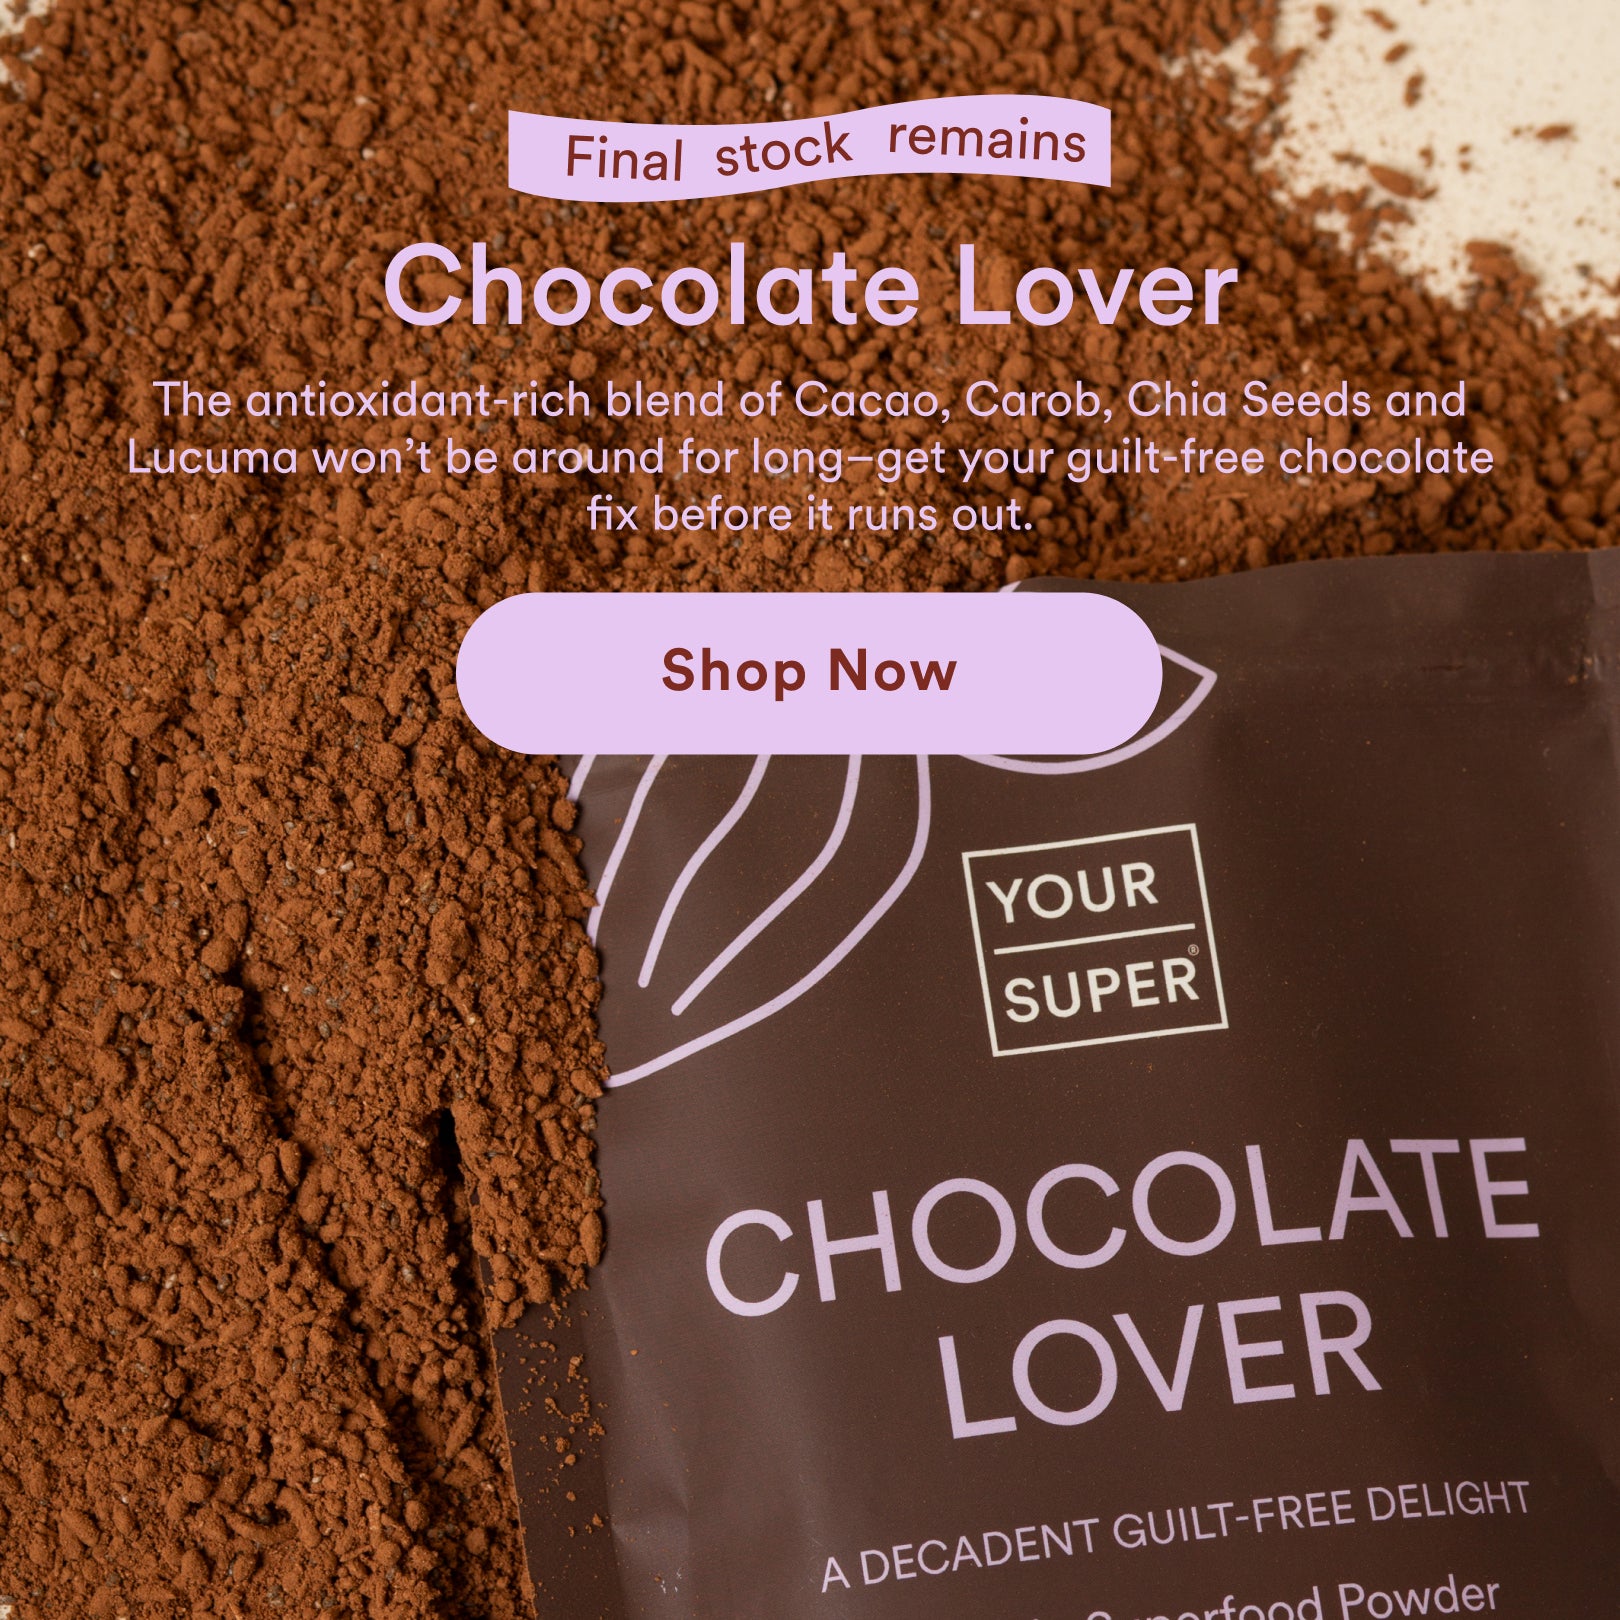 Chocolate Lover with new packaging